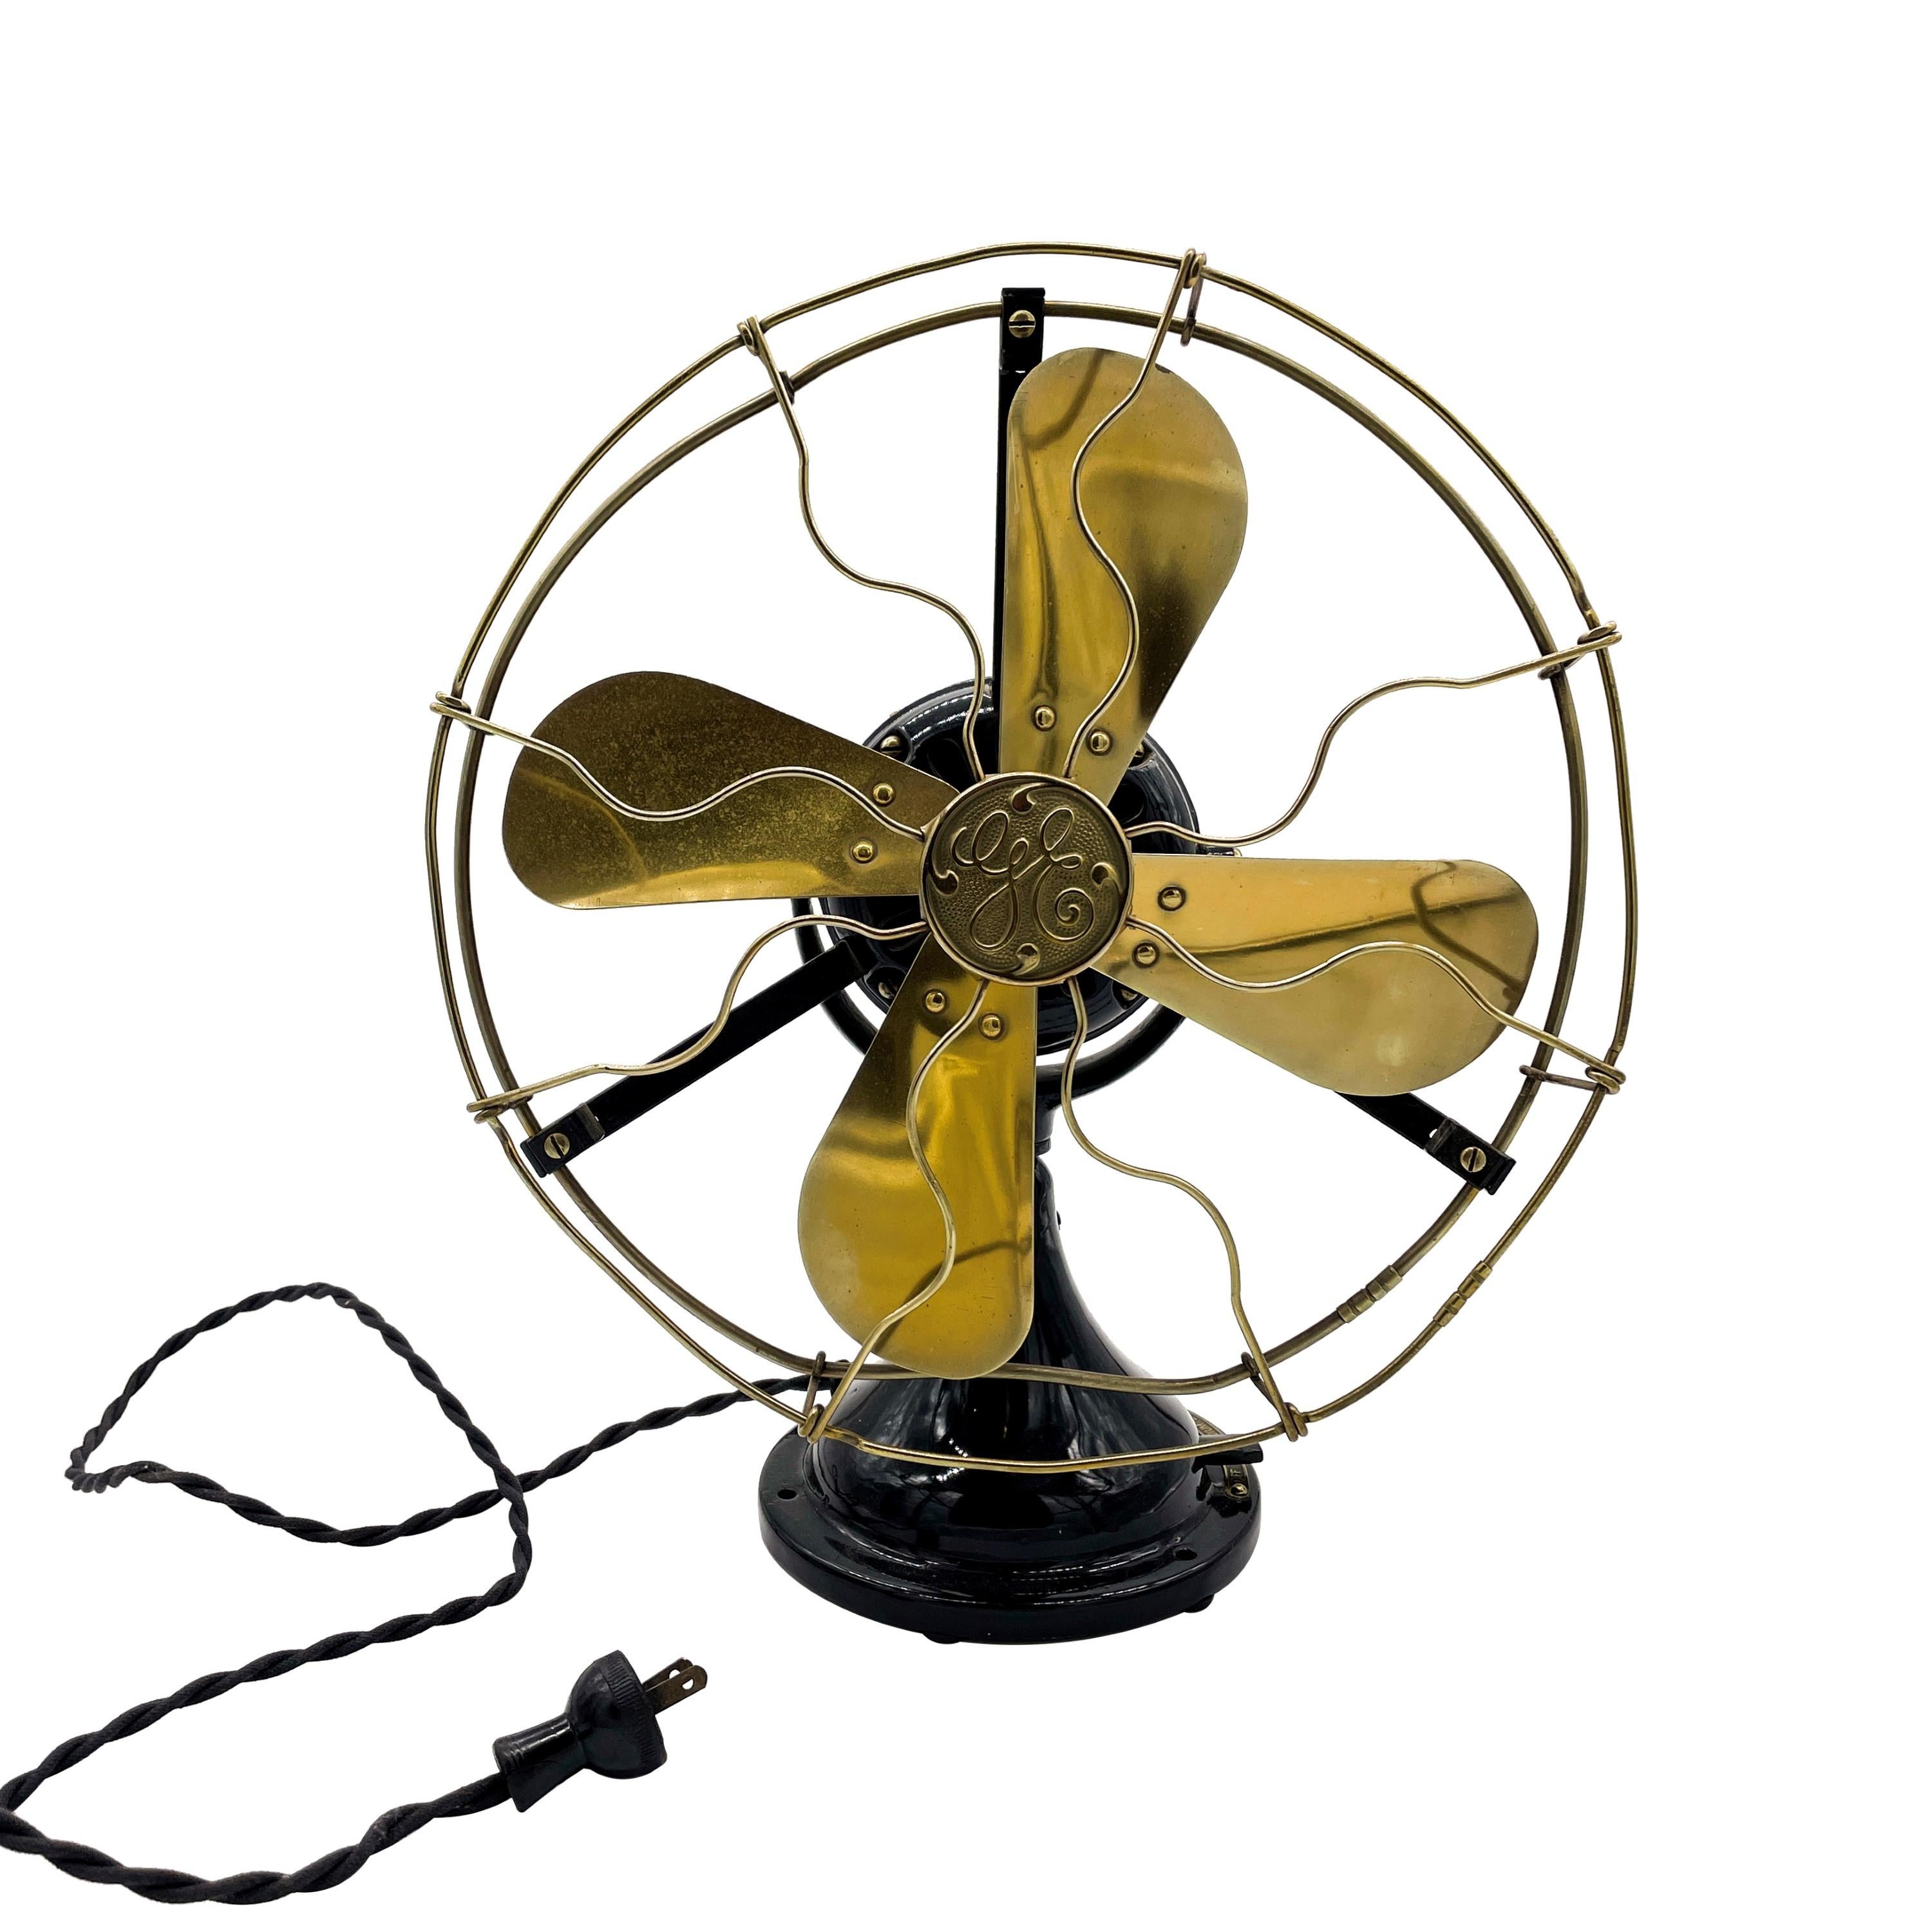 Manufactured by General Electric early 1900s table or desk fan featuring polished brass fan blades and a black finished base. Good restored condition. Please note, this item is located in one of our NYC locations.